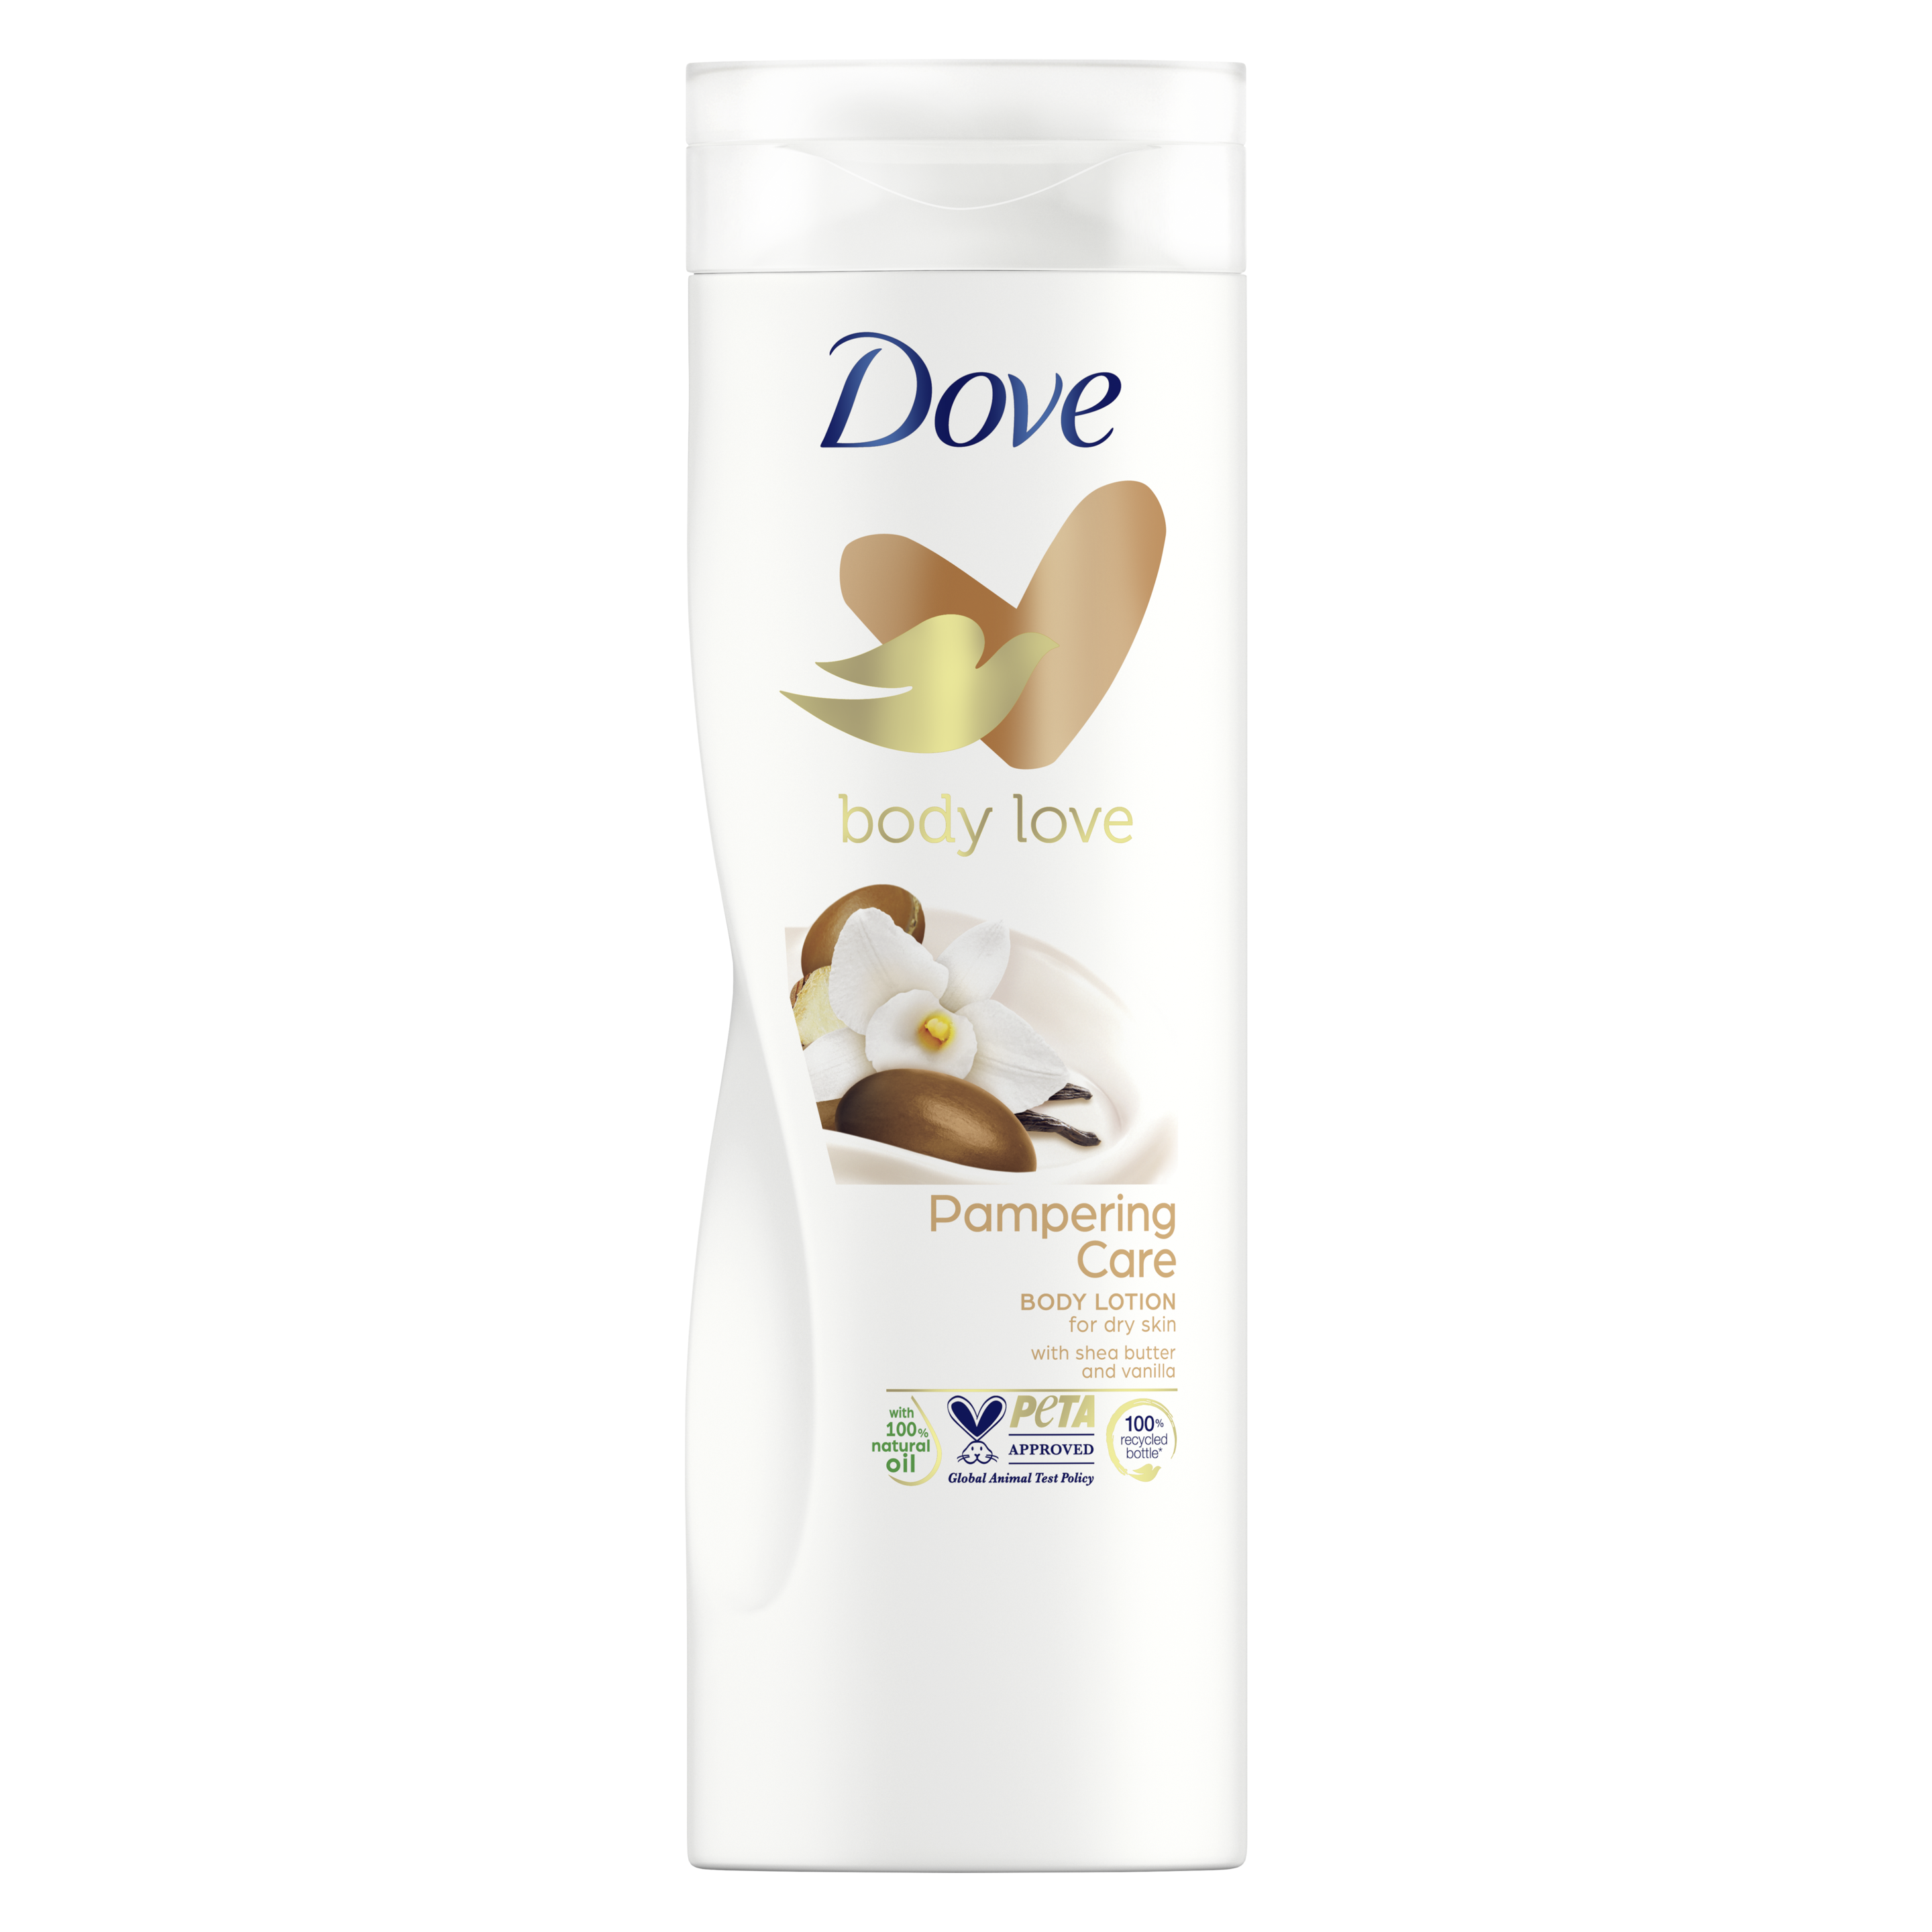 Dove Body Love Pampering Care Body Lotion for Dry Skin 400ml